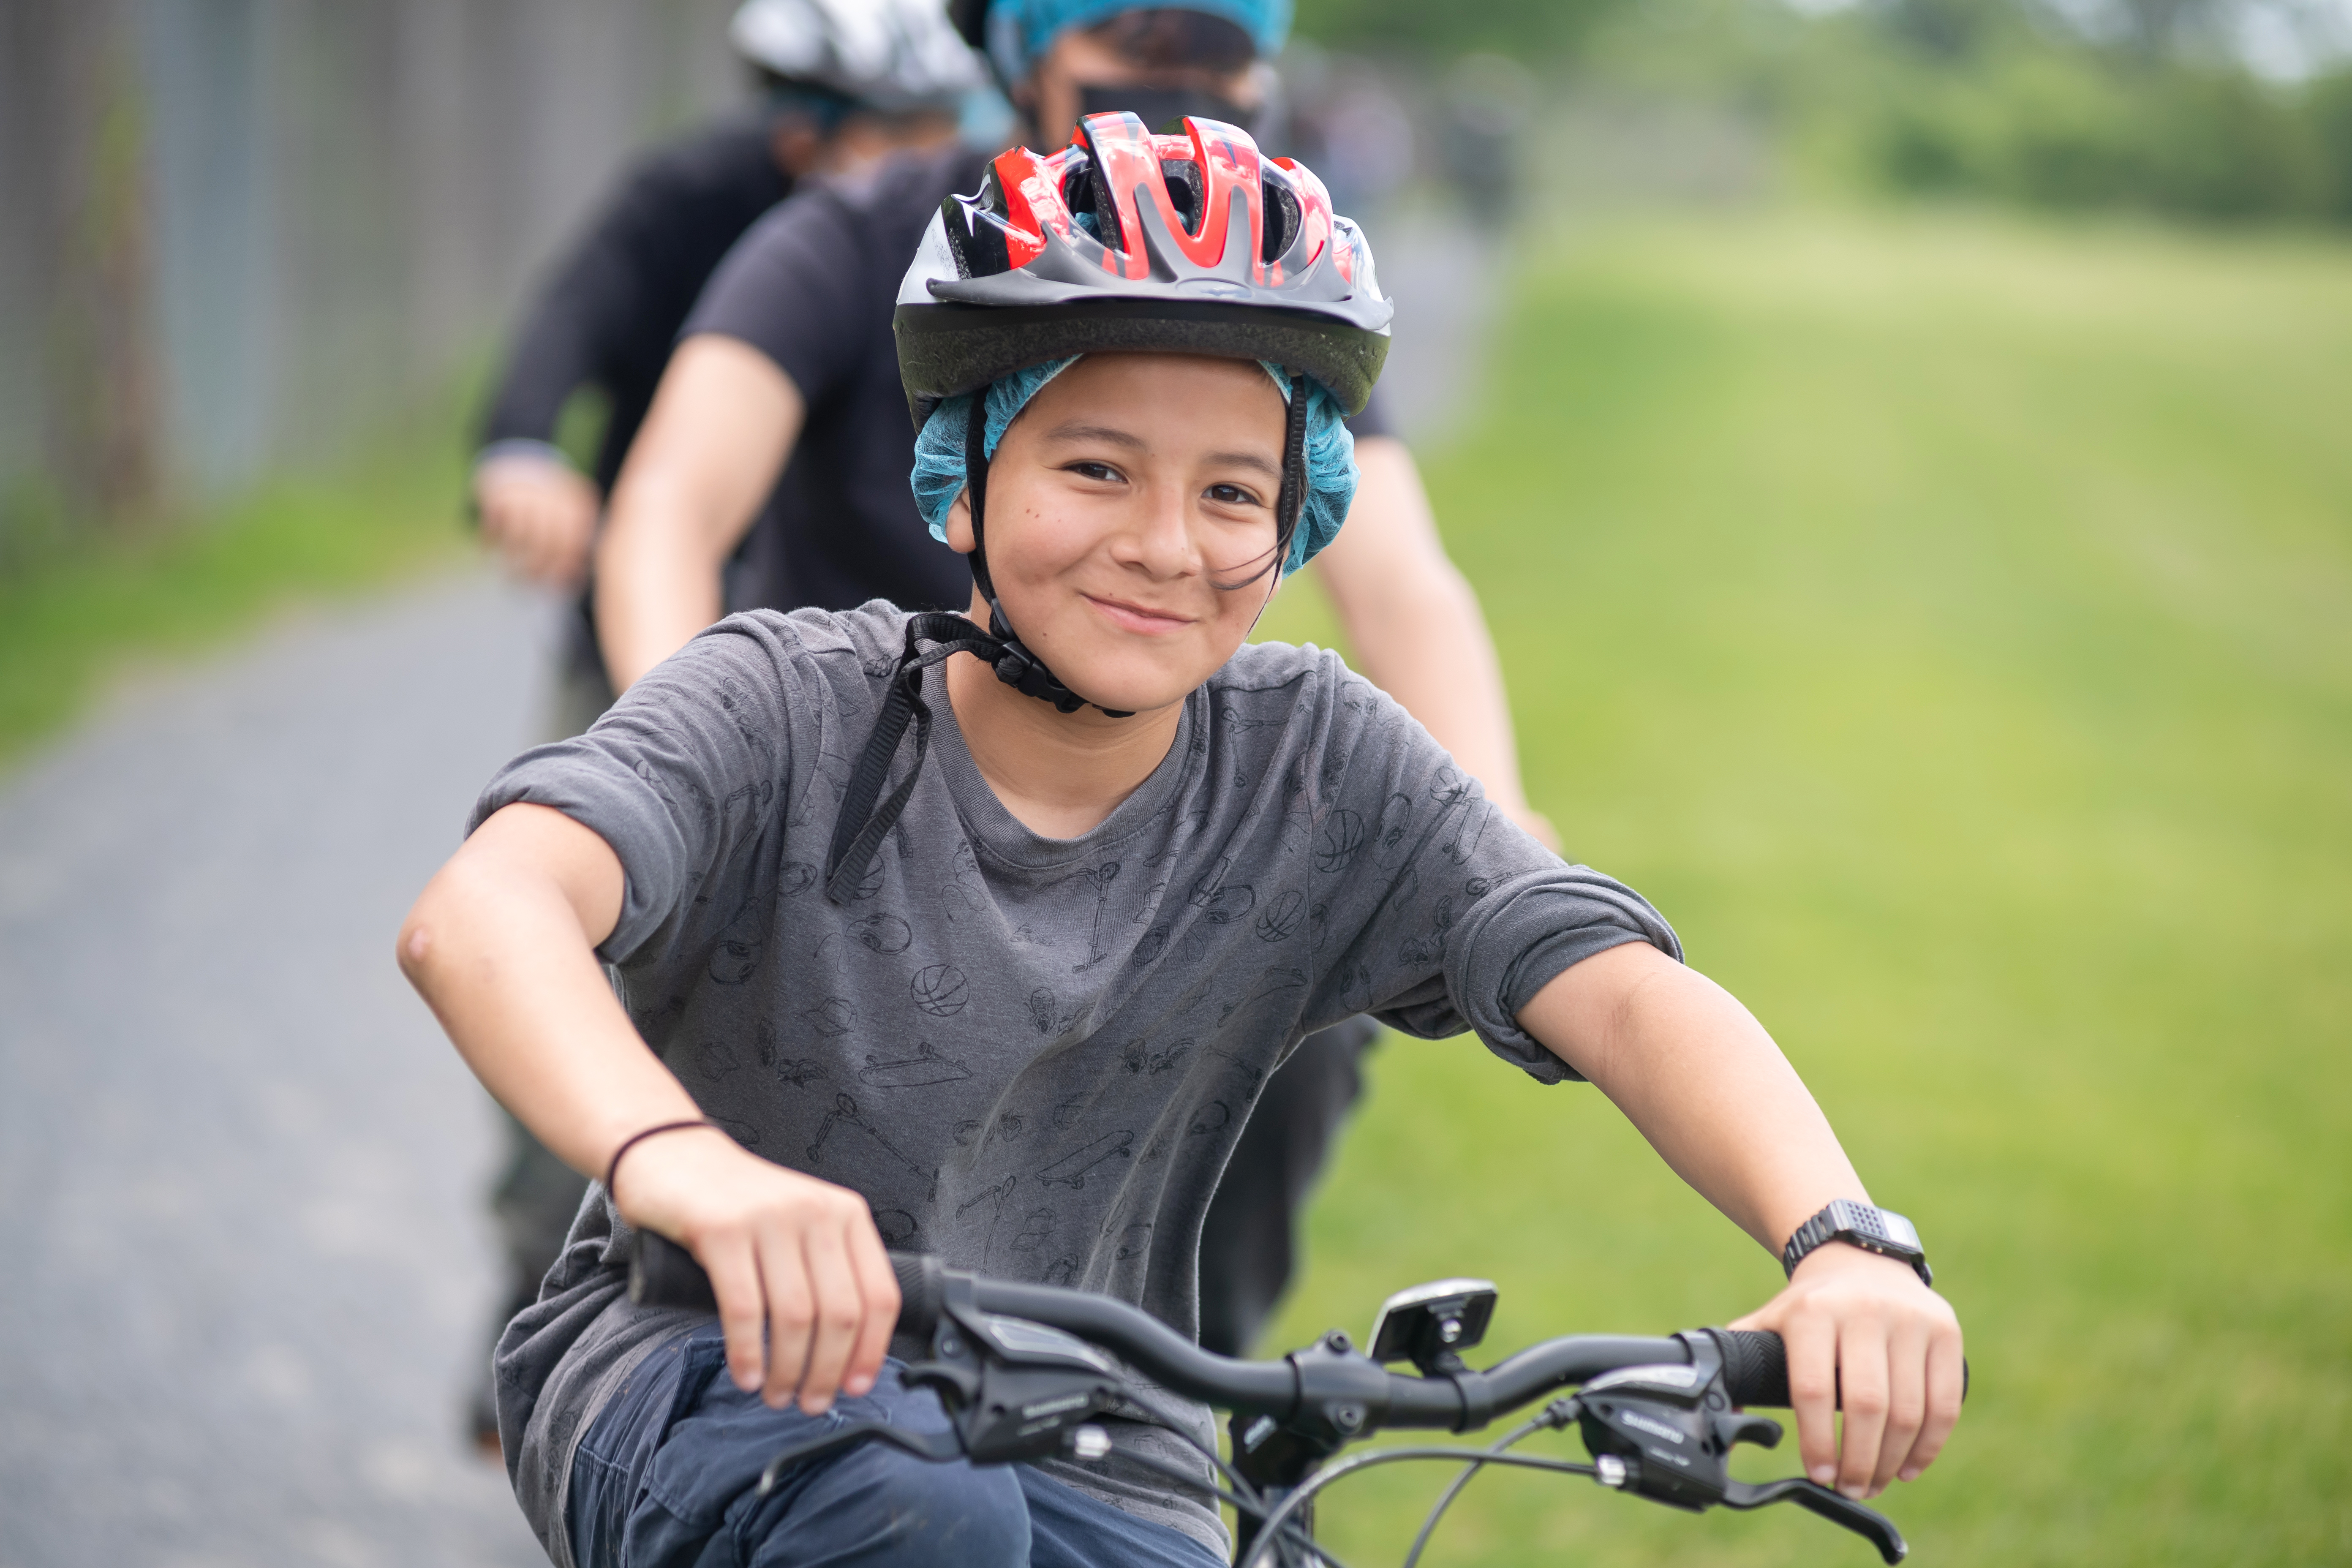 A Poe MS student smiles while riding a bike in physical education class.